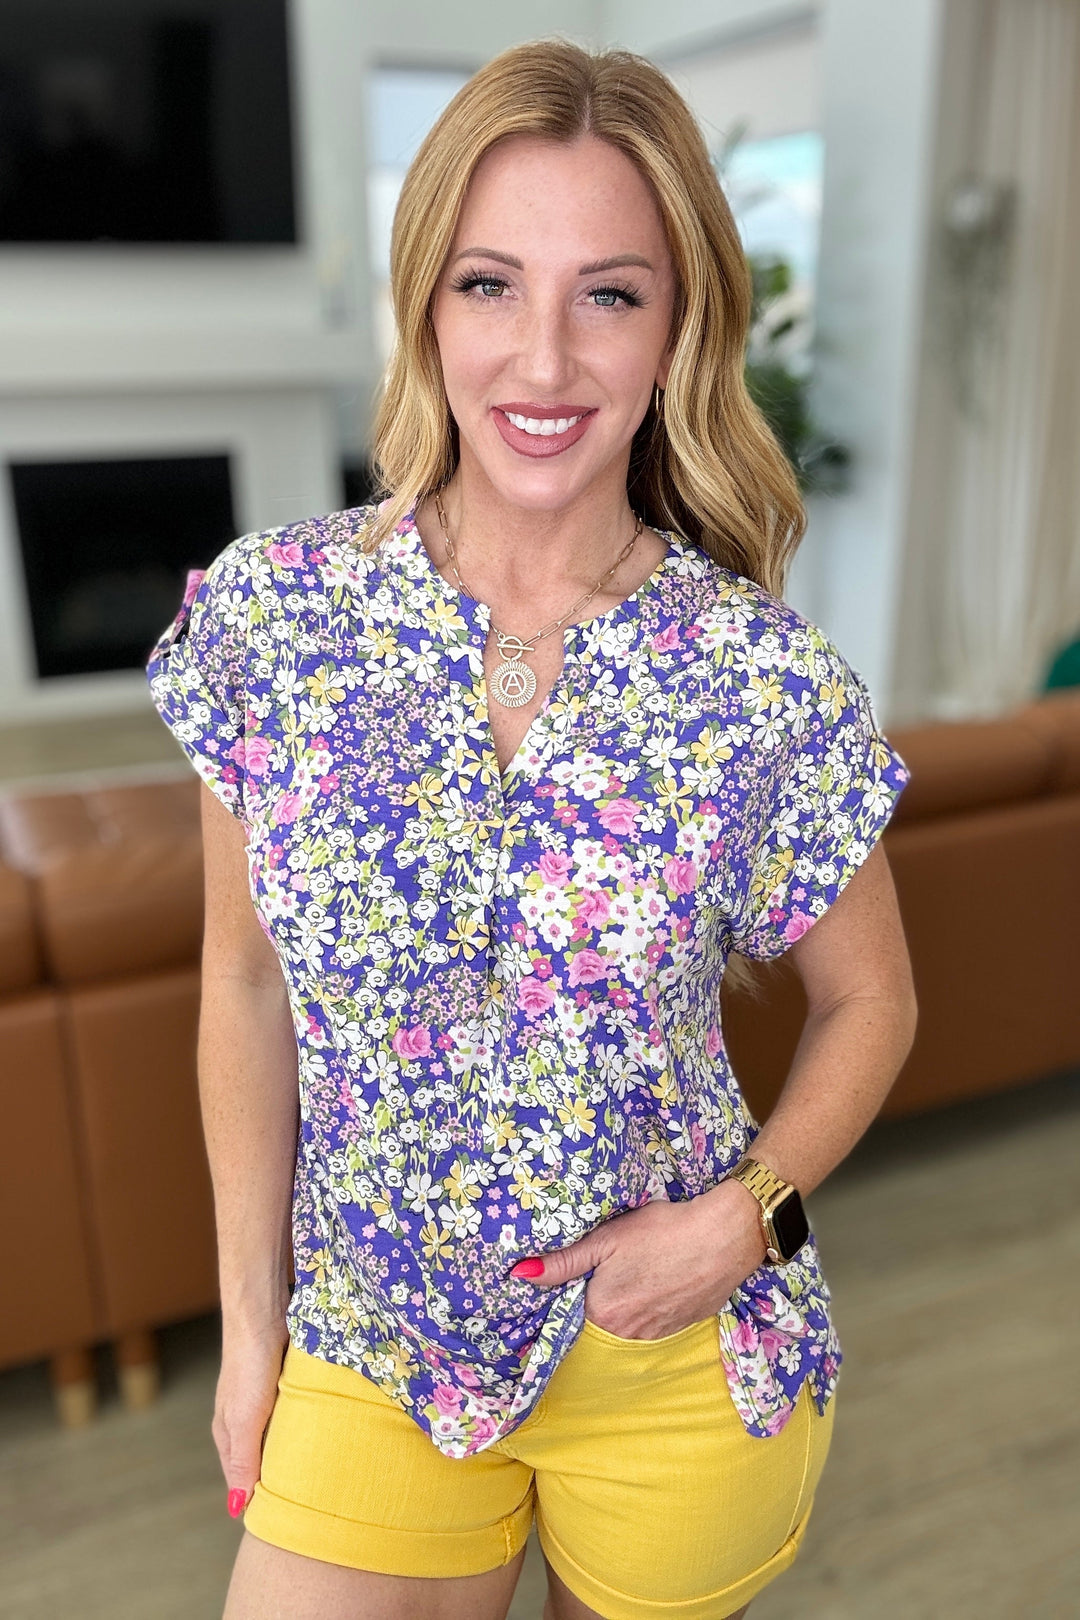 Lizzy Cap Sleeve Top in Lavender and Lime Ditsy Floral-Short Sleeve Tops-Inspired by Justeen-Women's Clothing Boutique in Chicago, Illinois